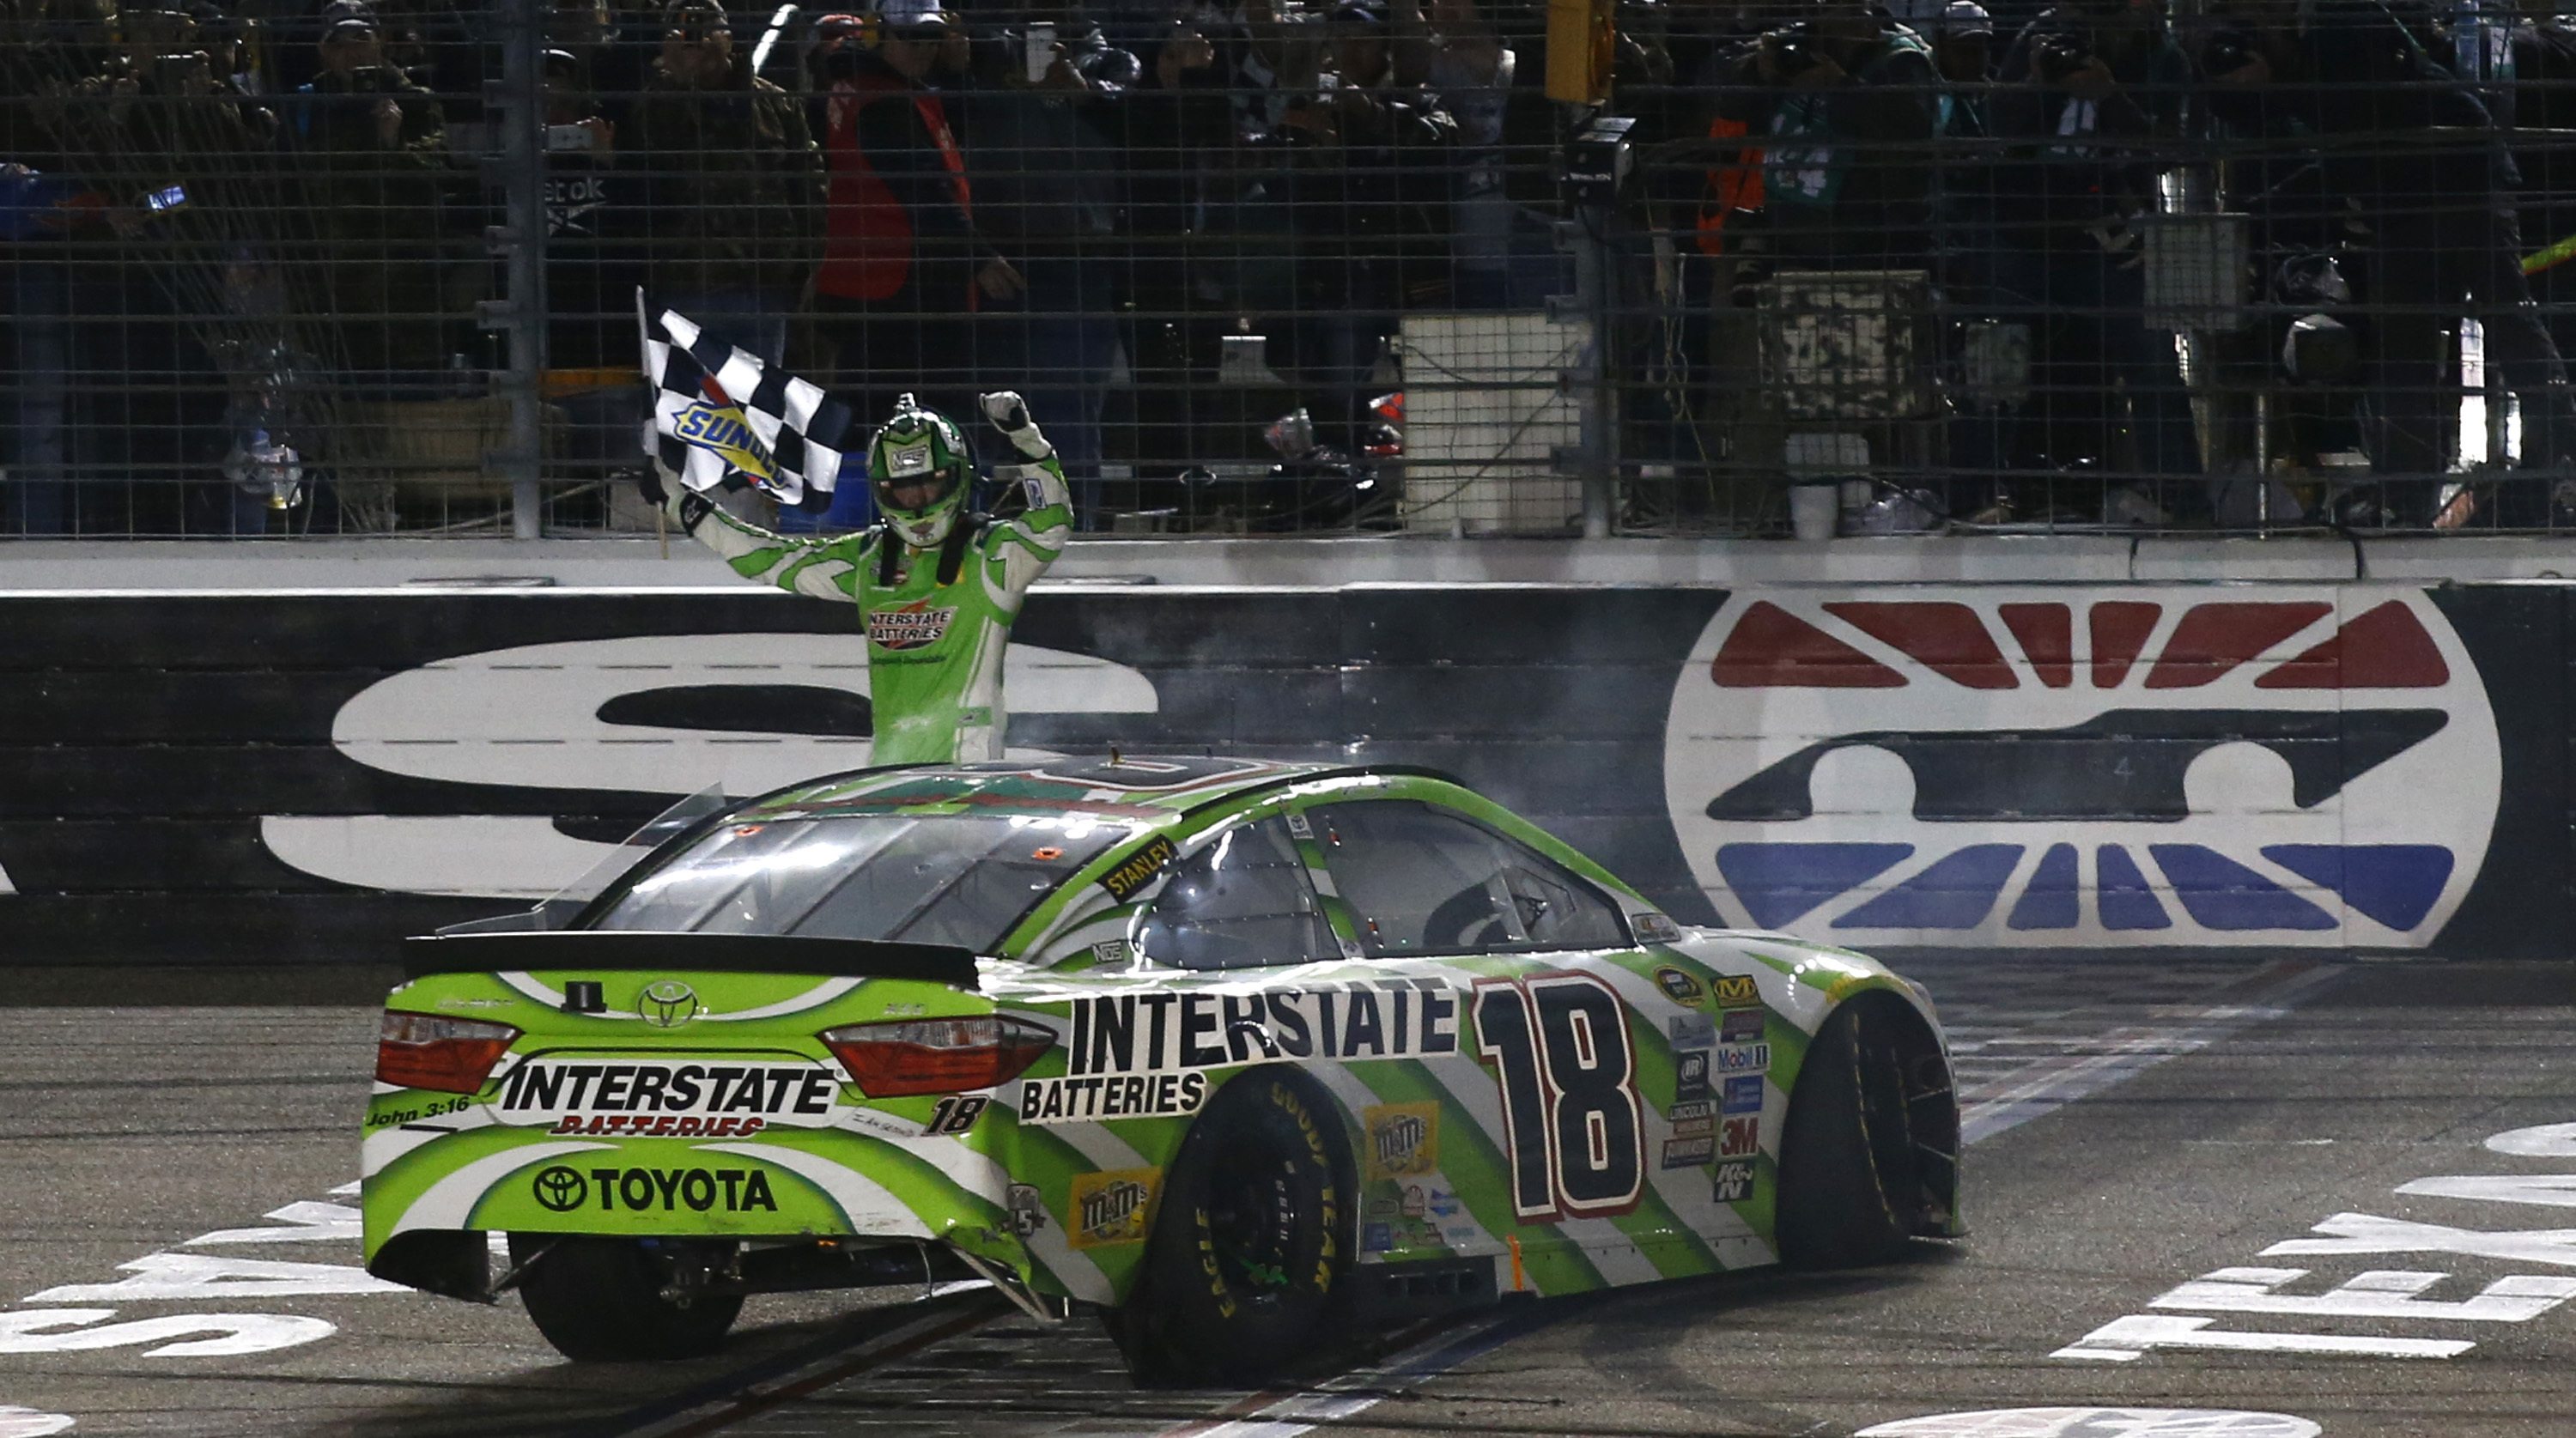 Kyle Busch celebrates after winning the NASCAR Sprint Cup Series auto race at Texas Motor Speedway in Fort Worth, Texas, early Sunday, April 10, 2016.